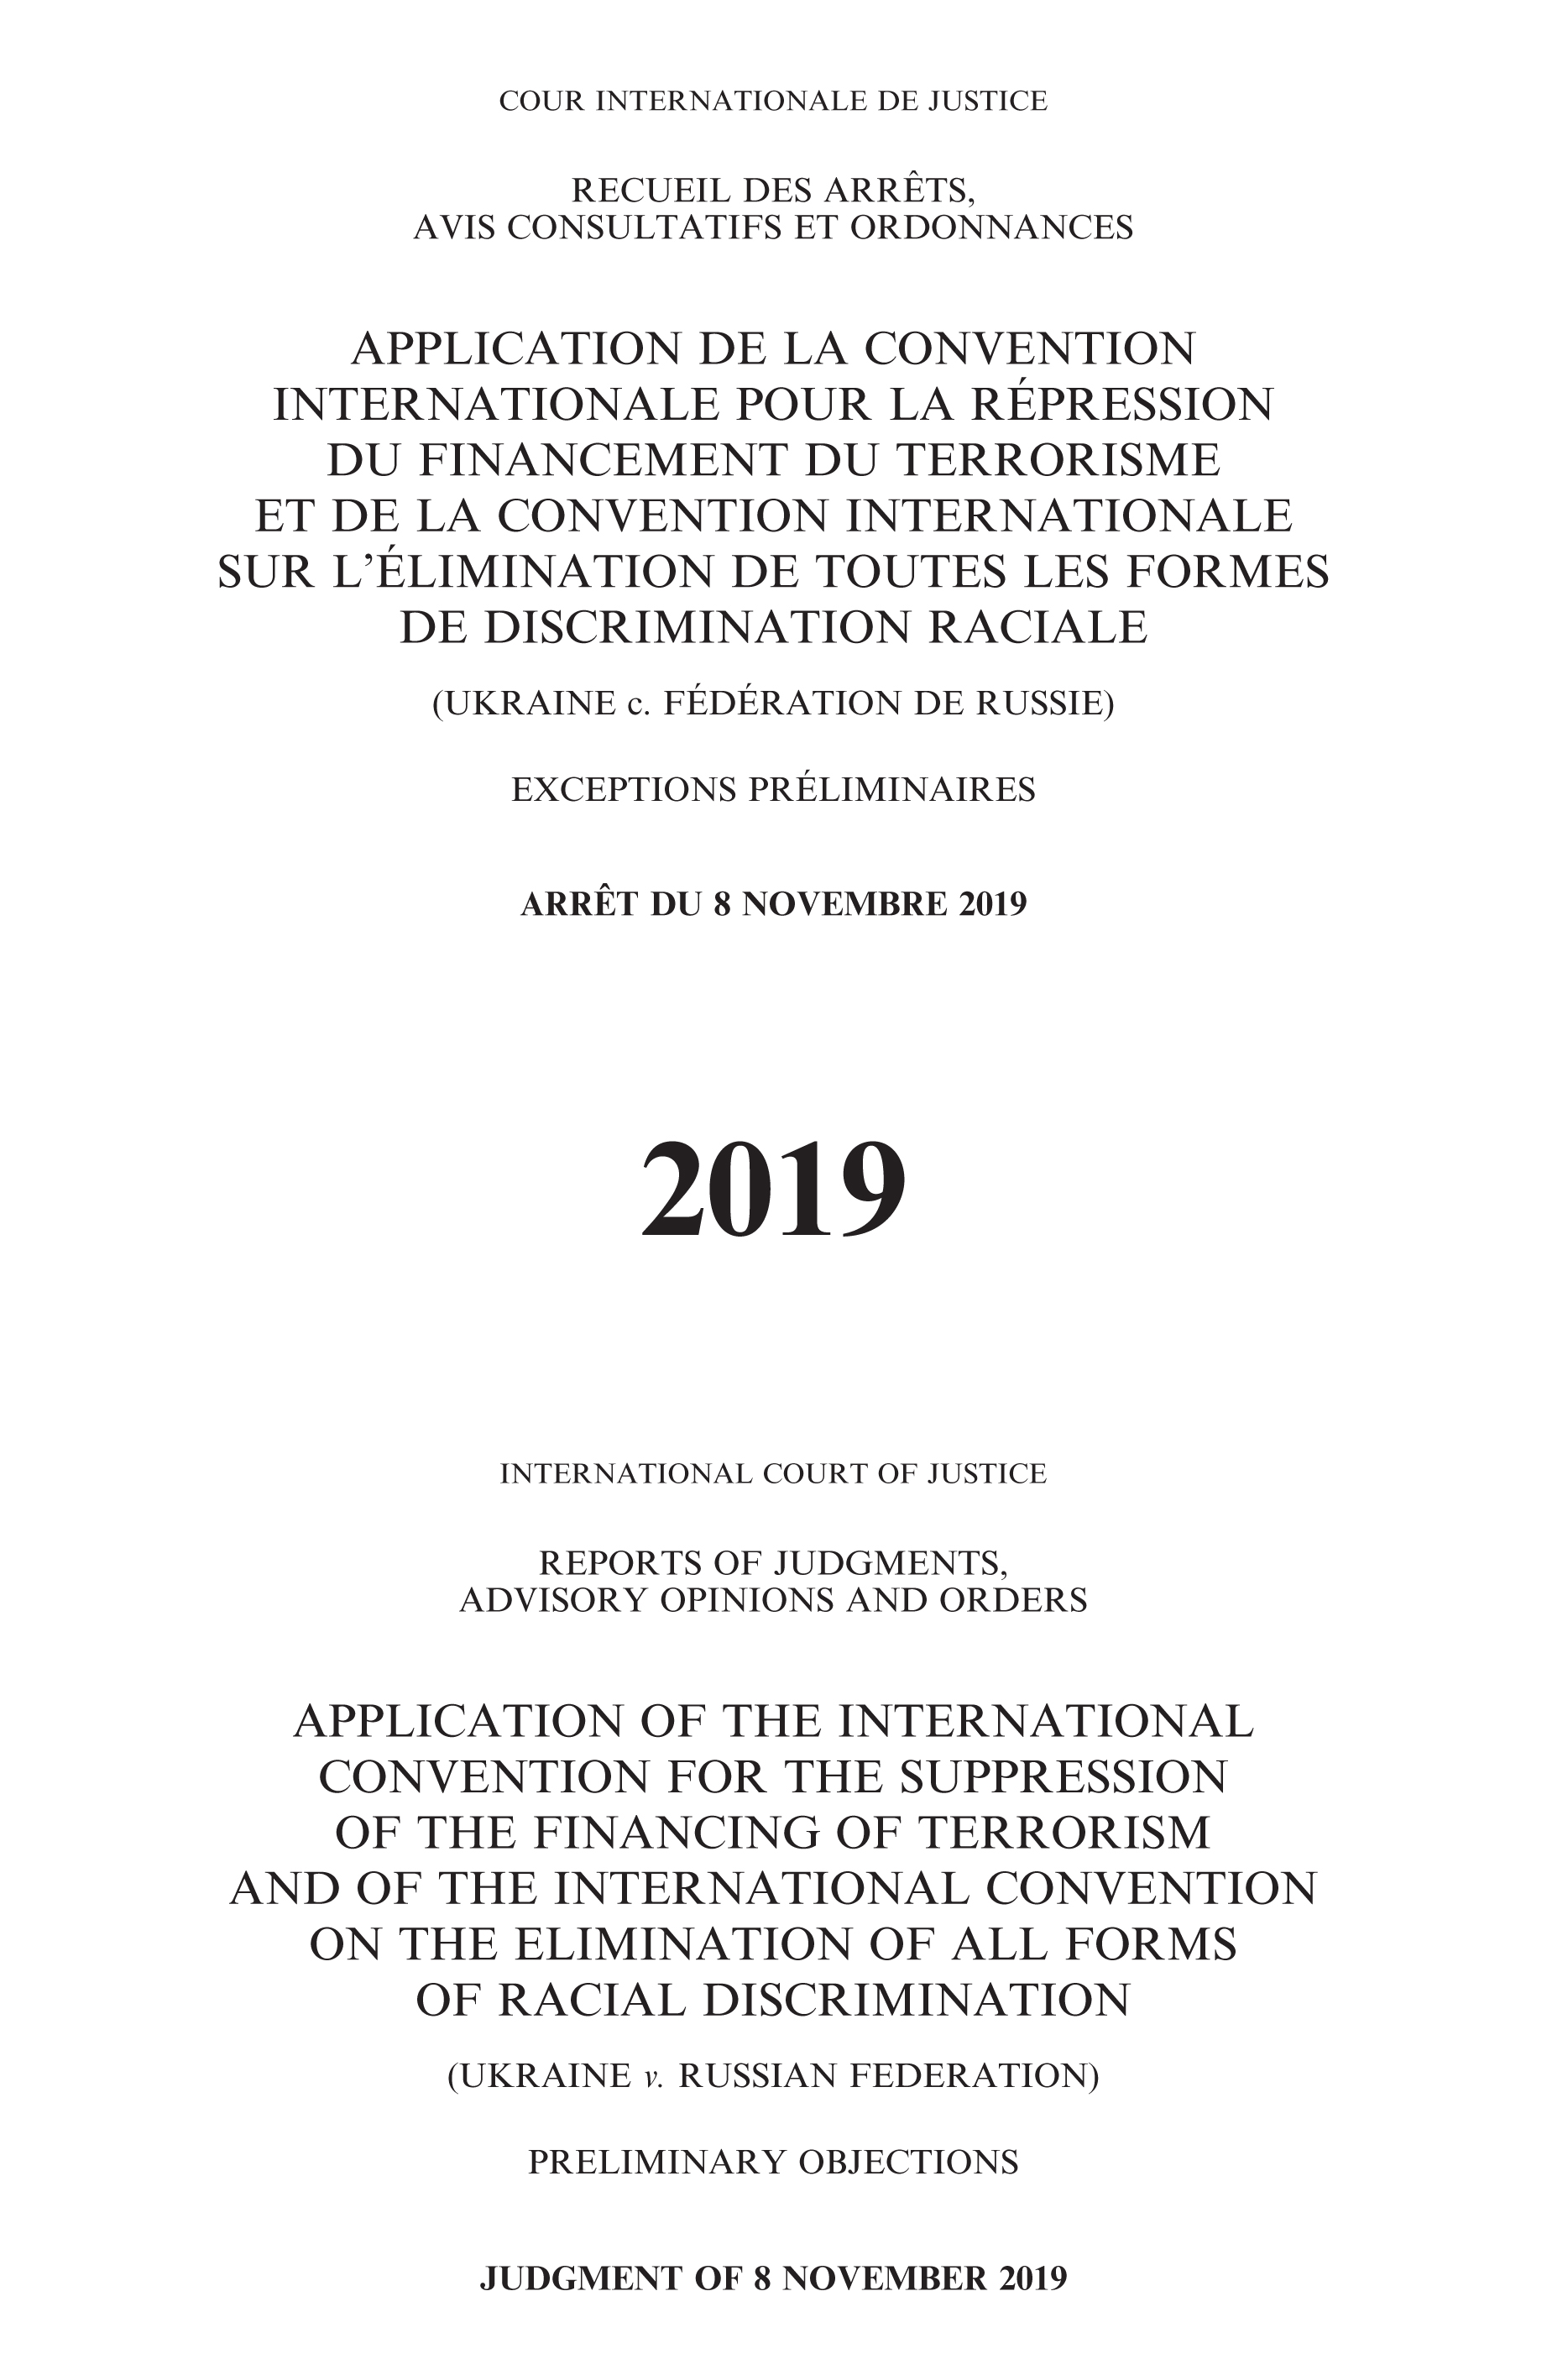 image of Reports of Judgments, Advisory Opinions and Orders: Application of the International Convention for the Suppression of the Financing of Terrorism and of the International Convention on the Elimination of all Forms of Racial Discrimination (Ukraine v. Russian Federation)